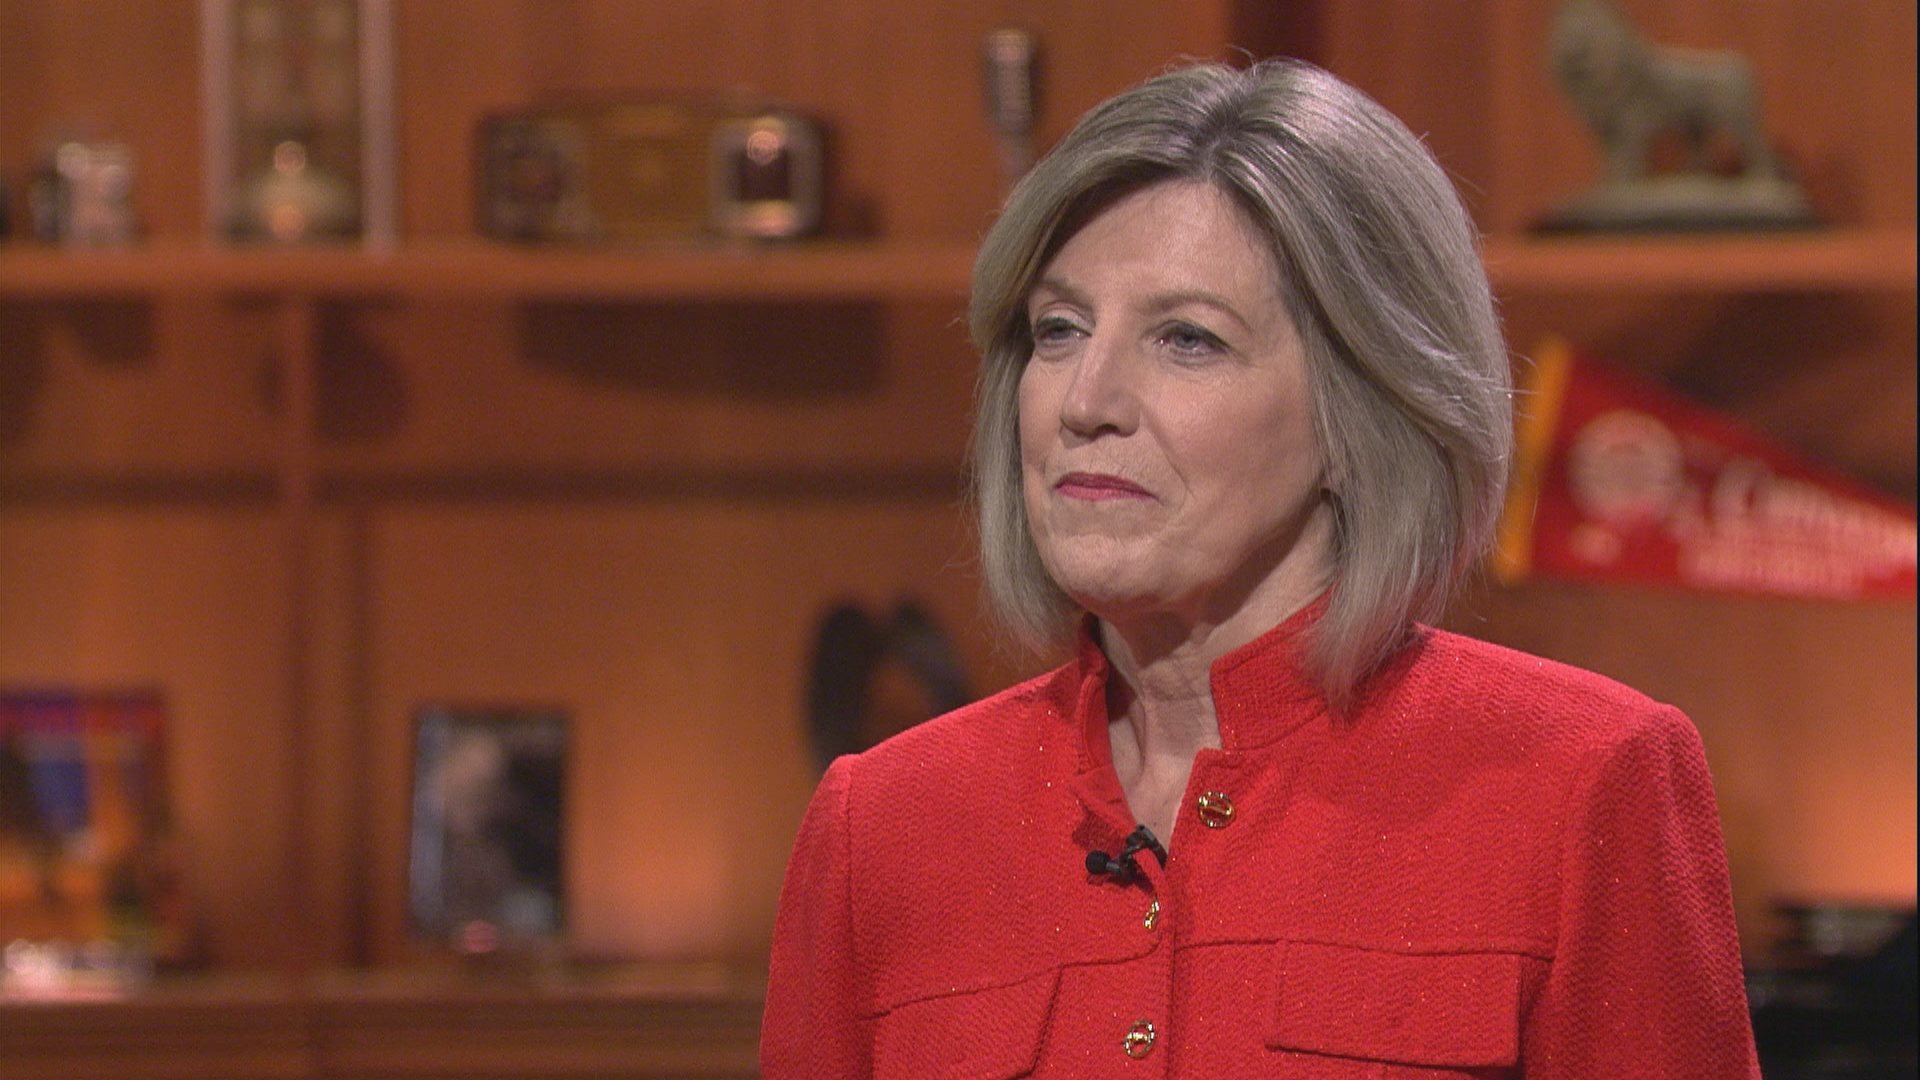 Retired Illinois Appellate Court Judge Sheila O’Brien appears on “Chicago Tonight” on June 24, 2019.